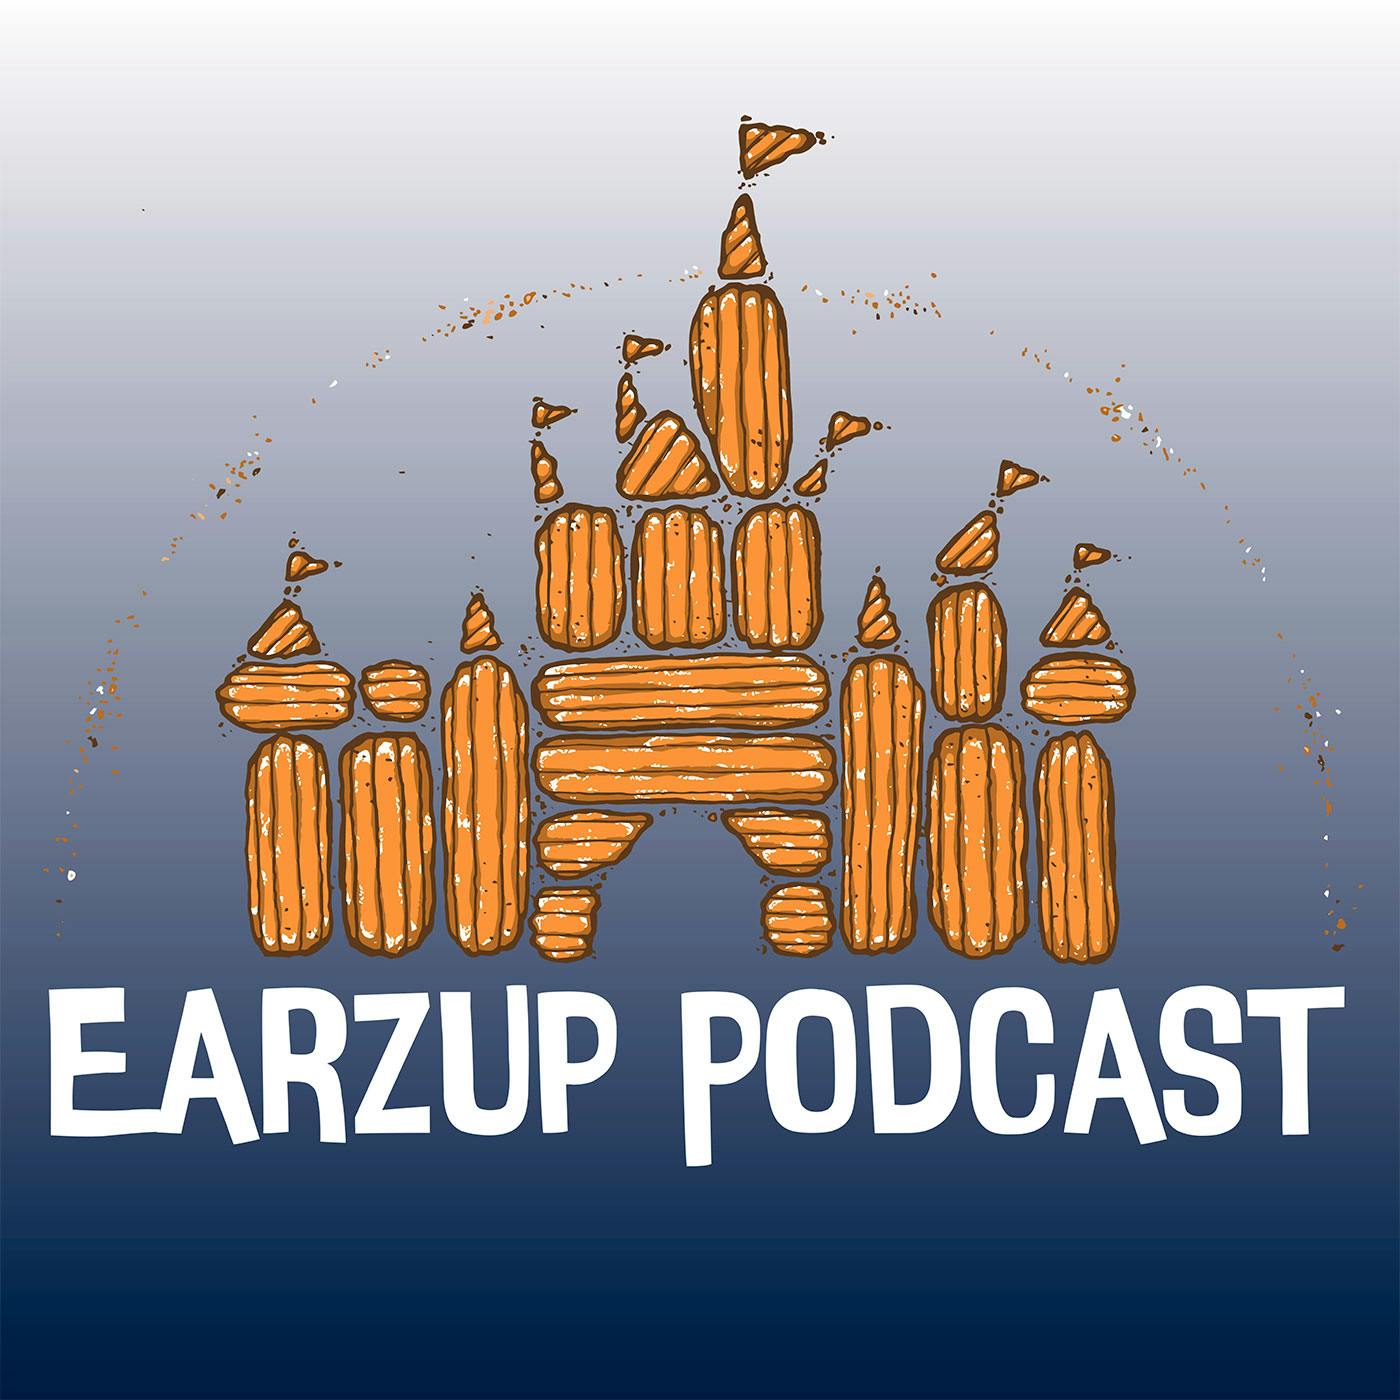 The EarzUp! Review of Star Wars: Galaxy’s Edge